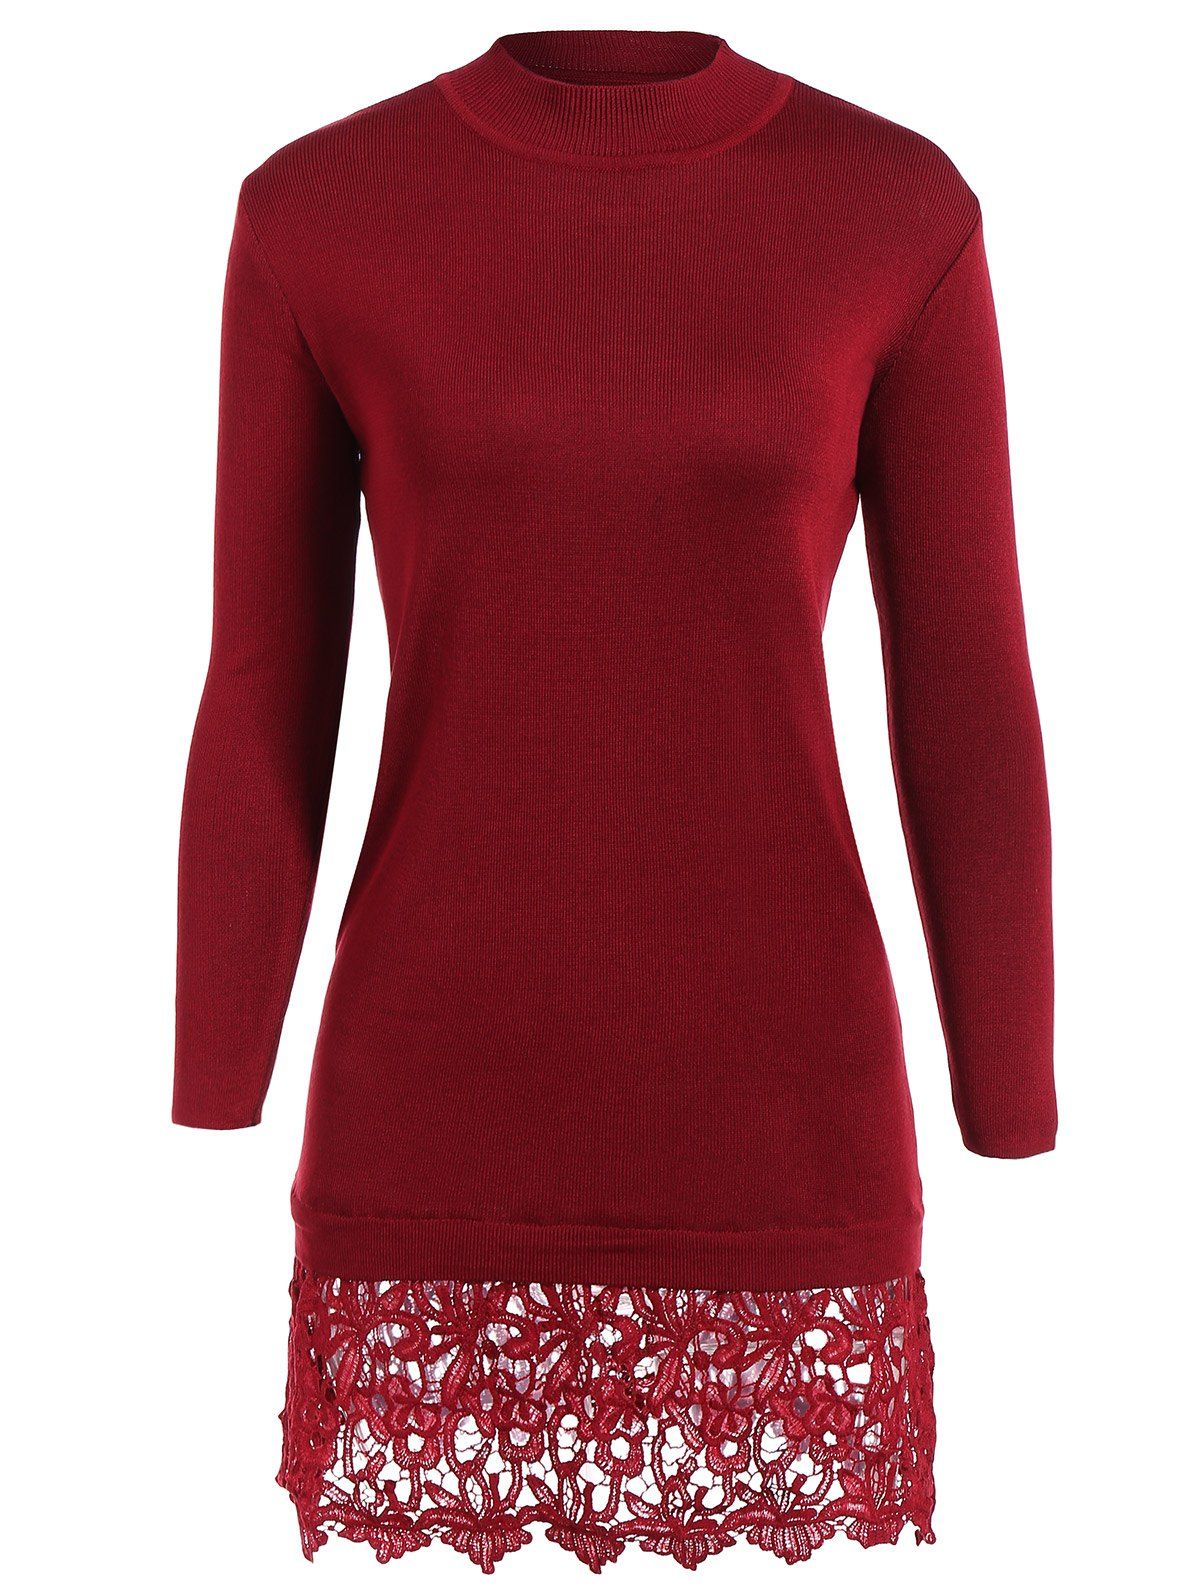 [17% OFF] 2021 Lacework Splicing Long Sleeve Sweater Dress In WINE RED ...